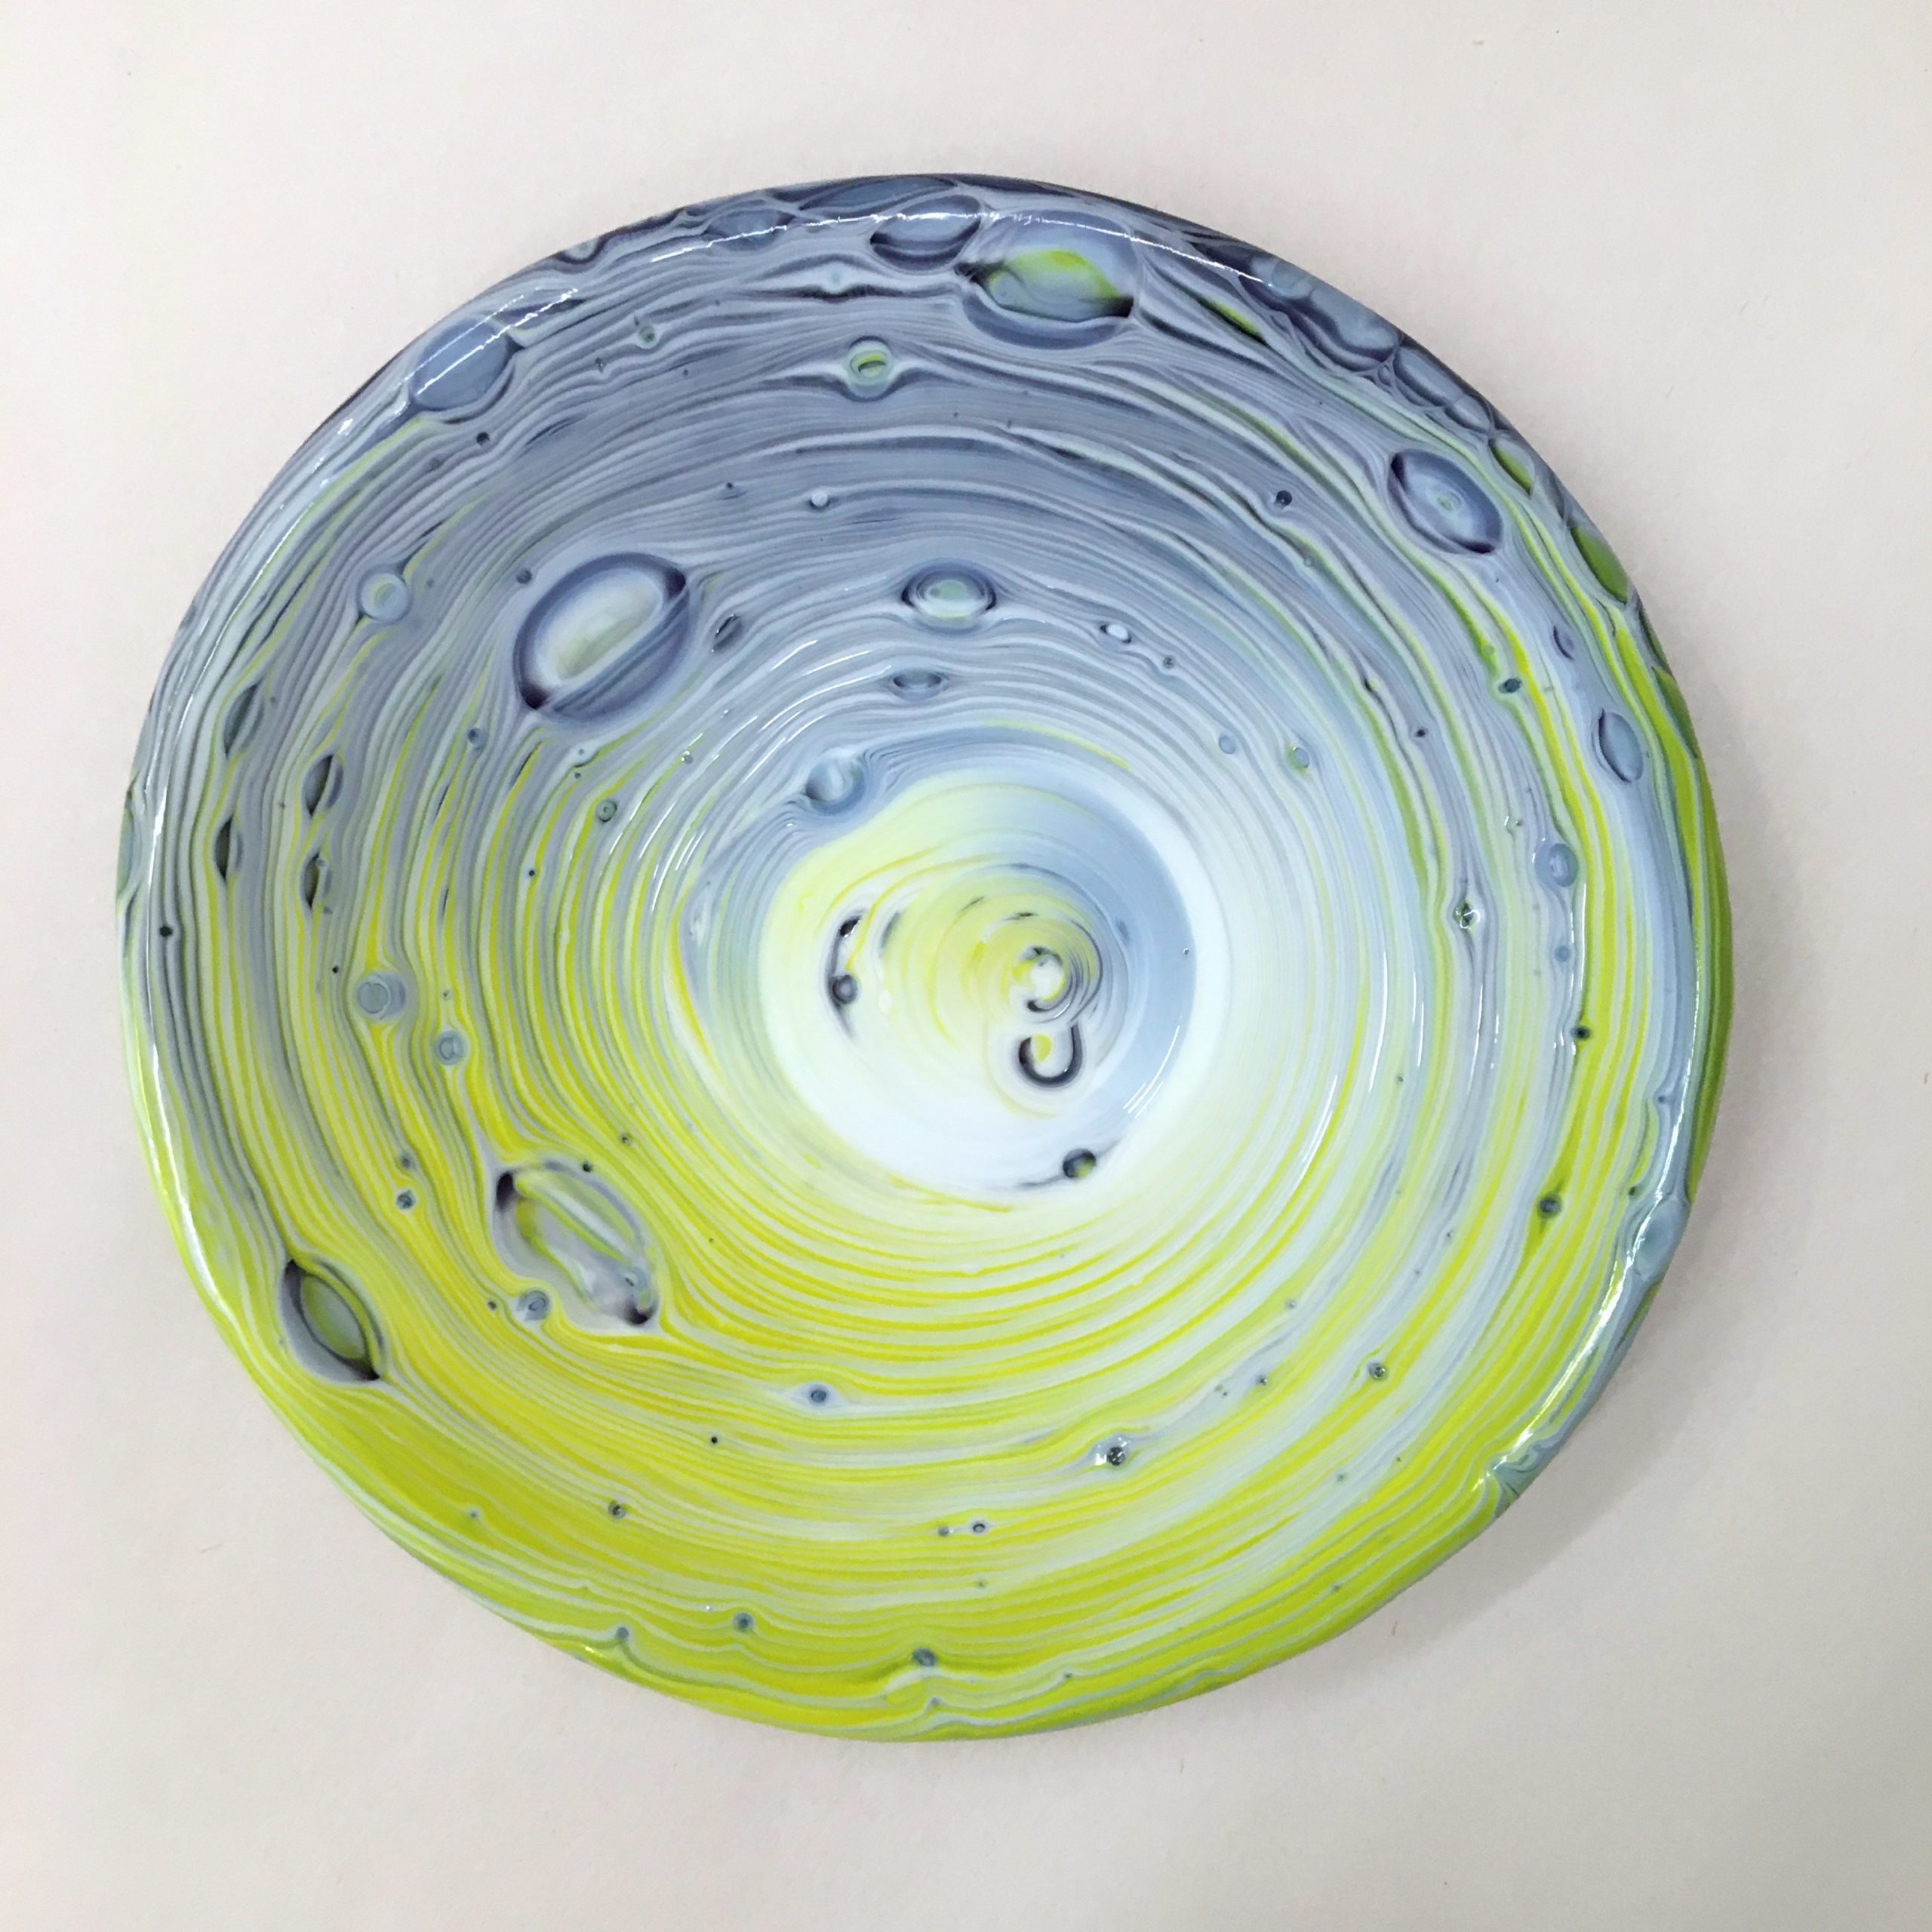 Image of a swirling, bubbly, white, purple and yellow glass plate